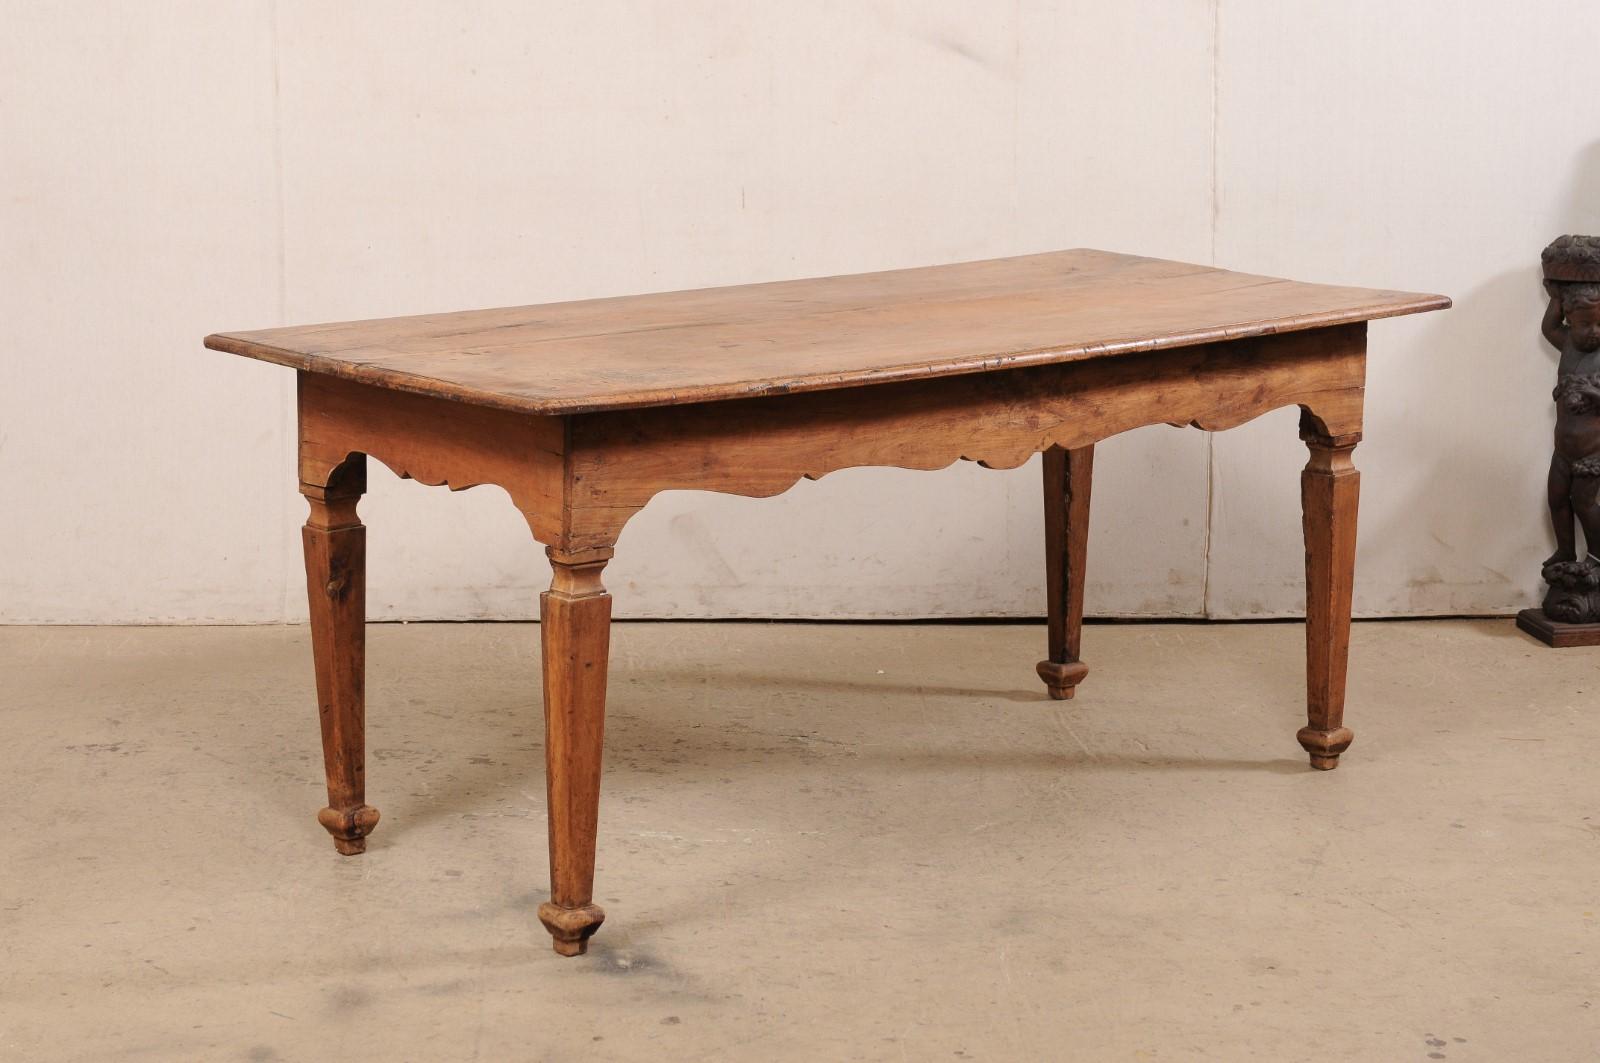 A Late 18th C. Italian Walnut Farm Table with Carved Skirt, 6 Ft Long For Sale 4